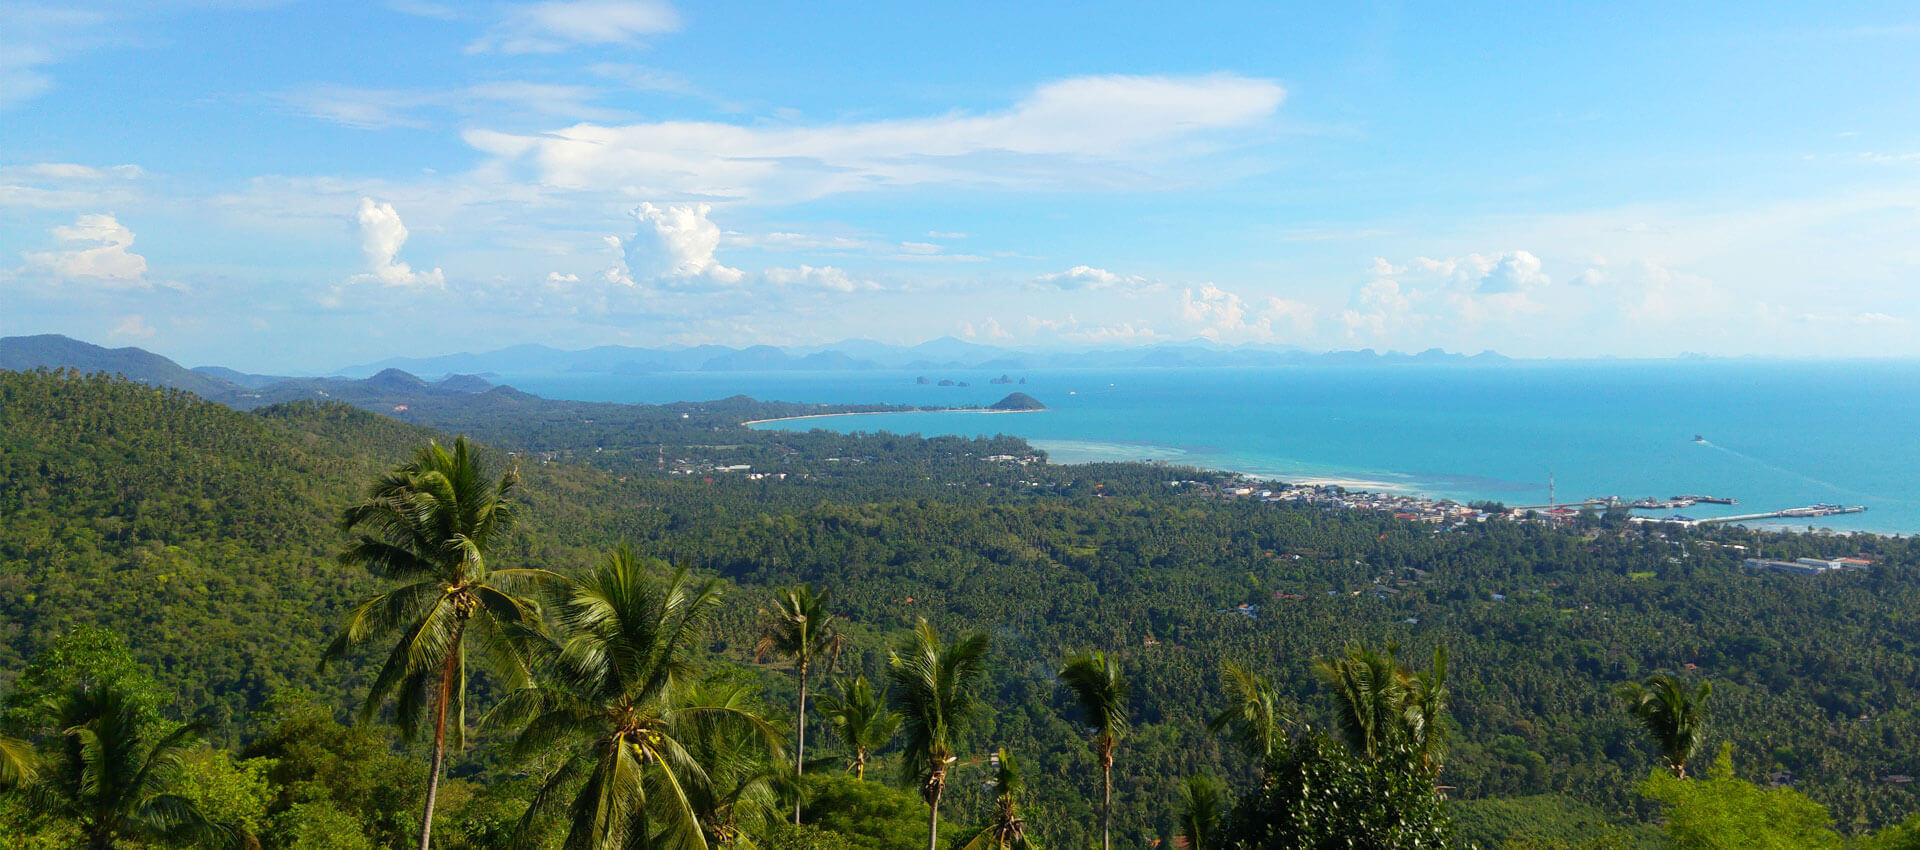 Our view in Koh Samui